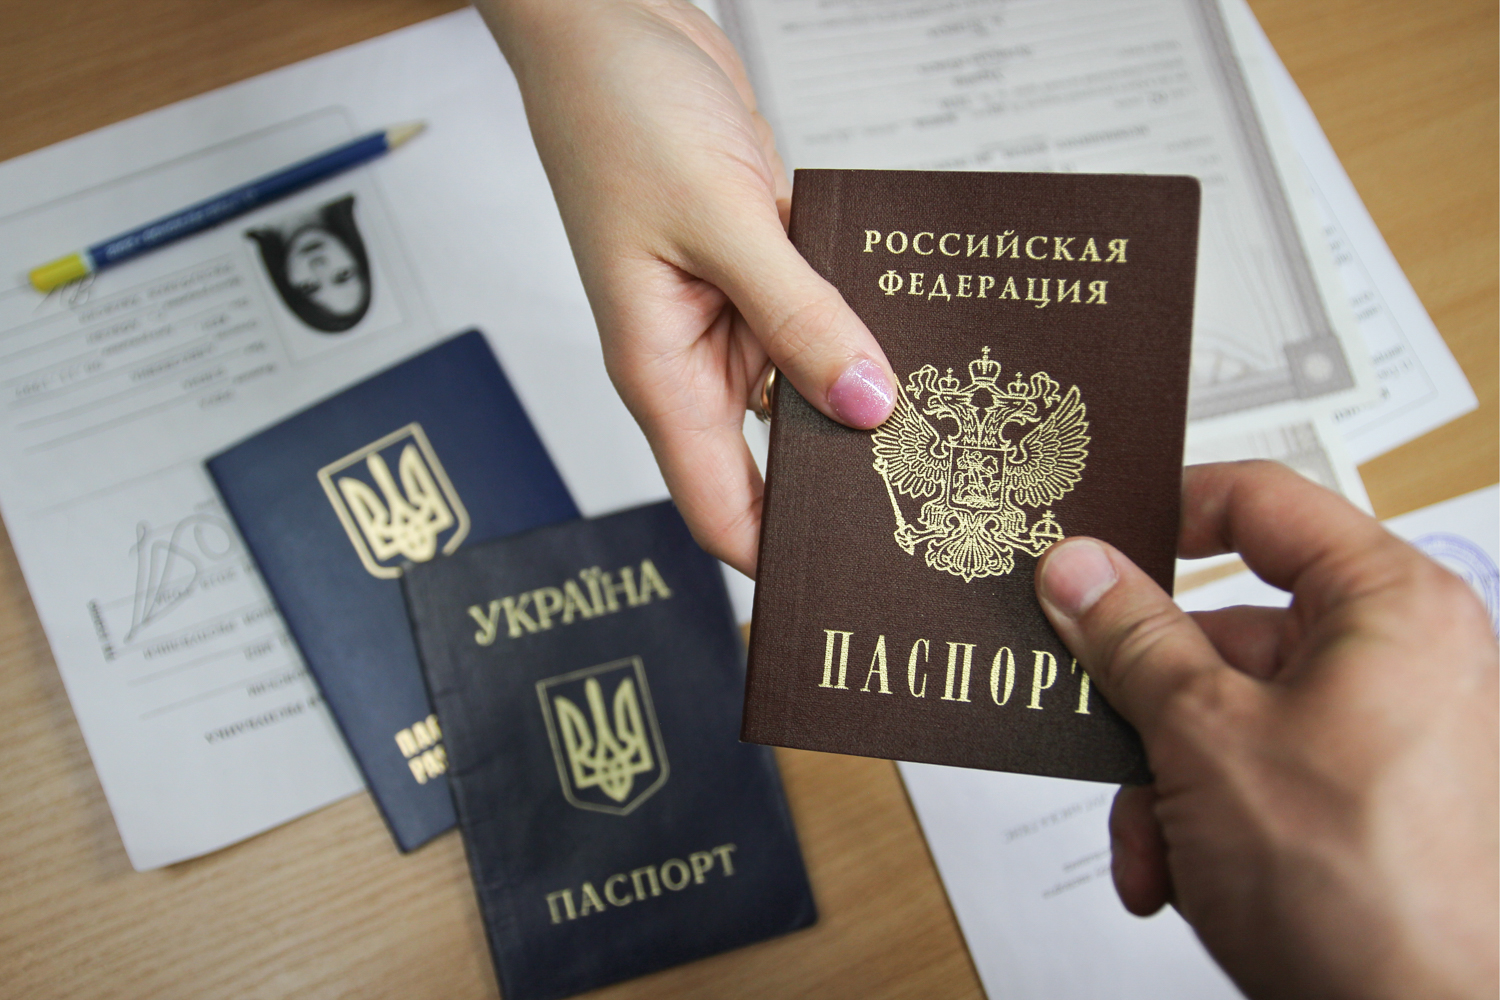 Centre for issuing Russian passports opens in Lugansk, east Ukraine